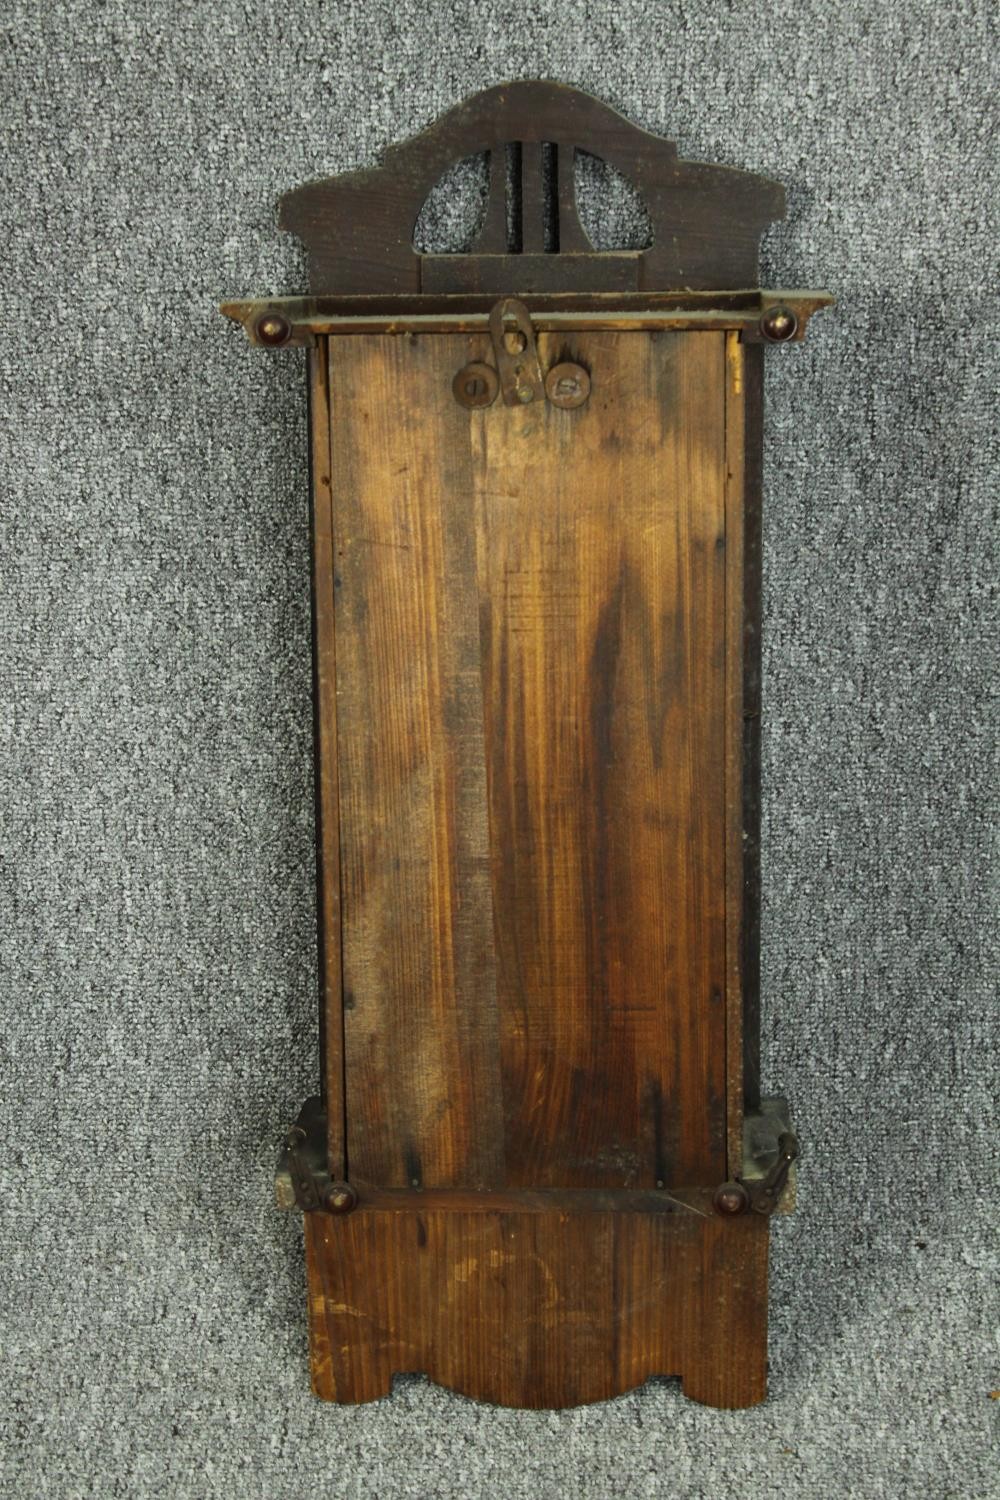 Wall clock, late 19th century mahogany with Art Nouveau style brass mounts. H.70 W.30 cm. - Image 5 of 5